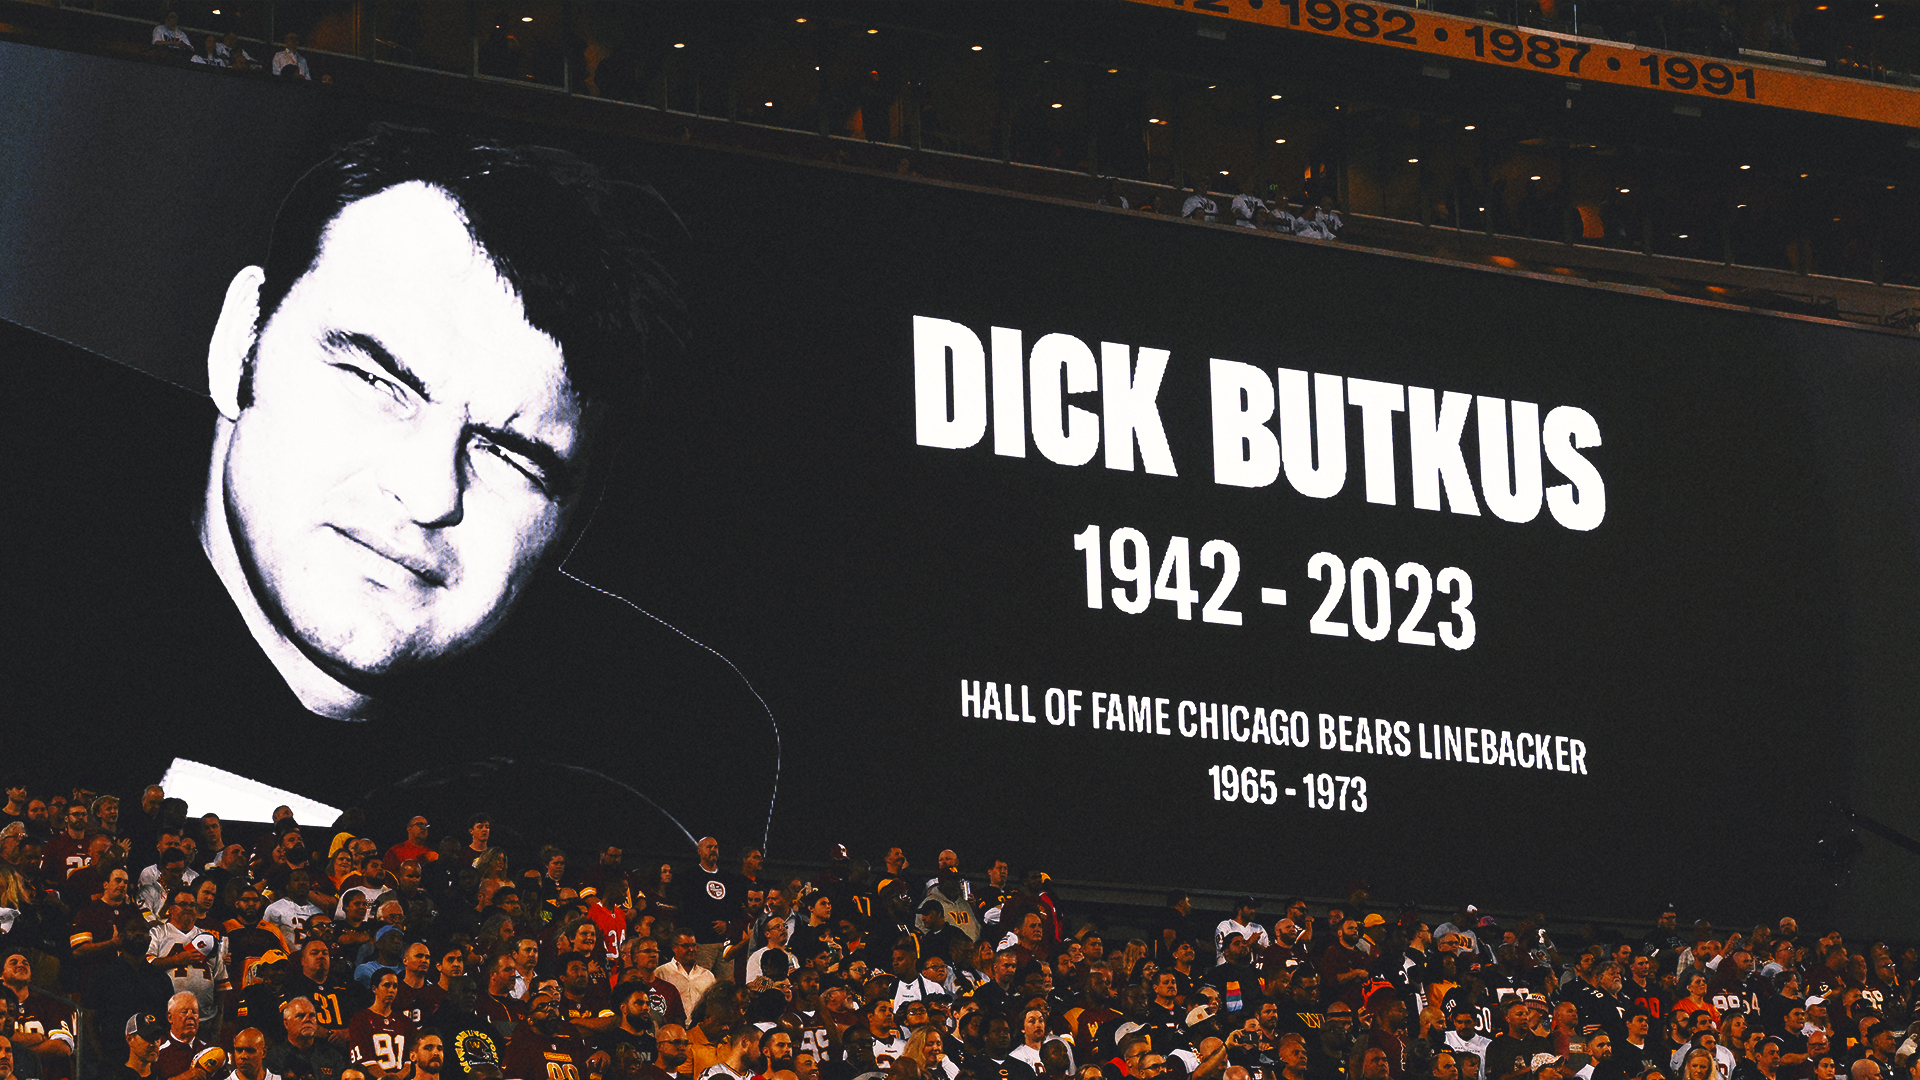 NFL, sports world mourns loss of Chicago Bears legend Dick Butkus